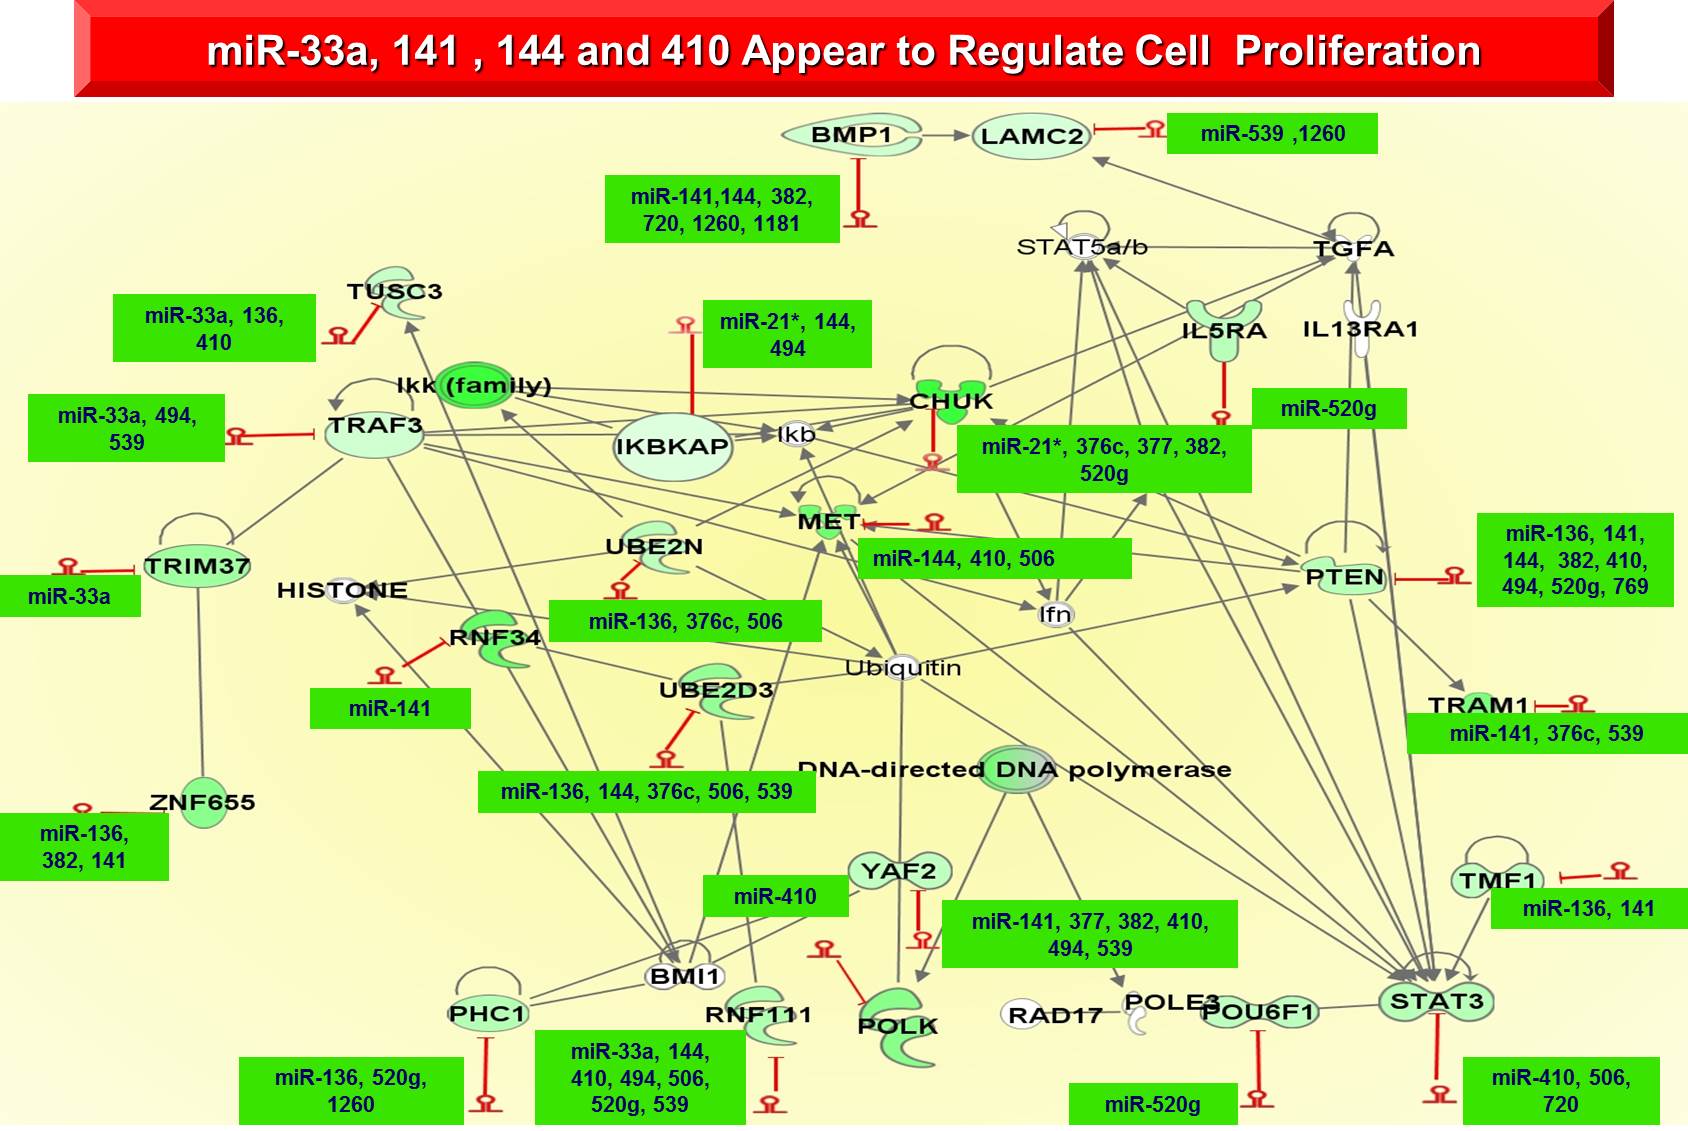 miR-33a, 141, 144 and 410 appear to regulate cell proliferation